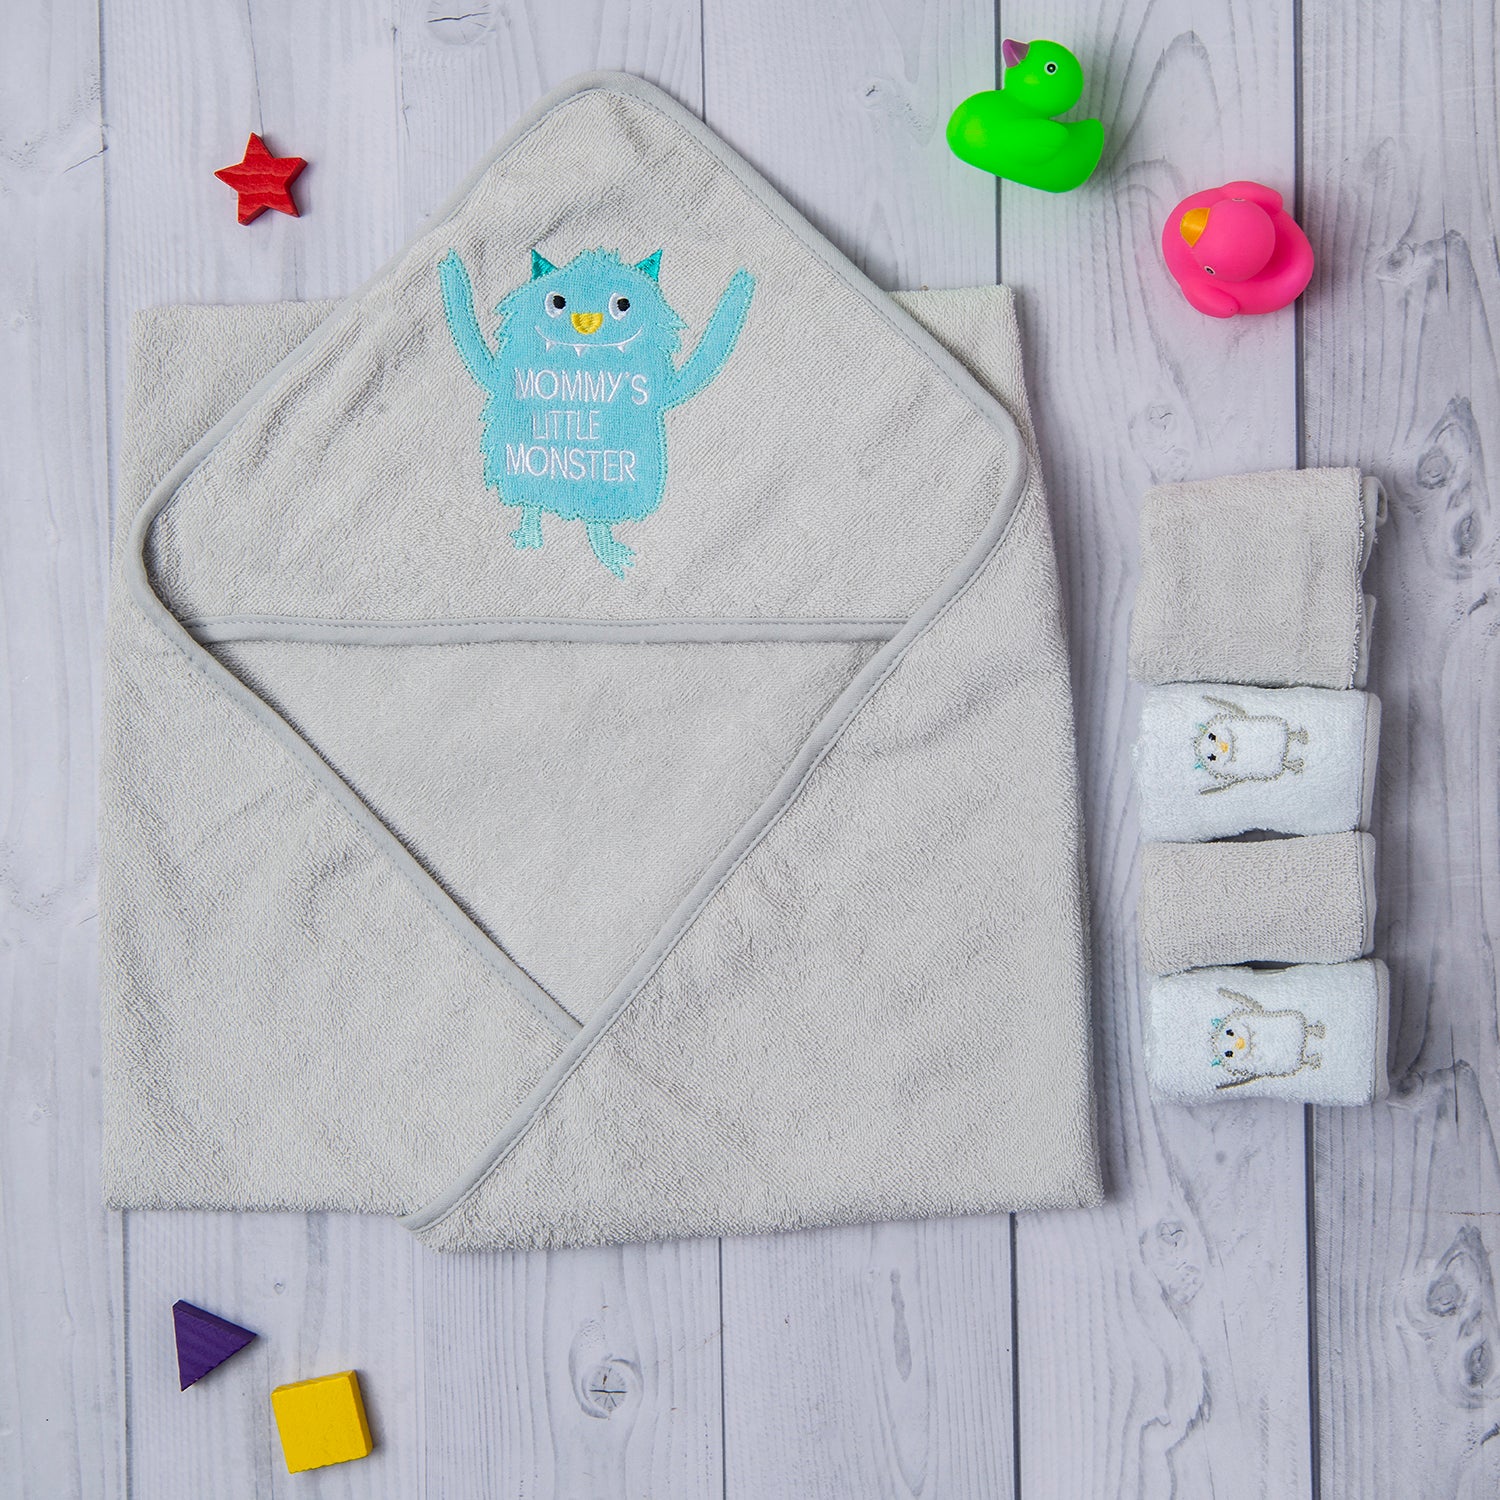 Hooded Towel And 4 Wash Cloth Gift Set Little Monster Grey - Baby Moo